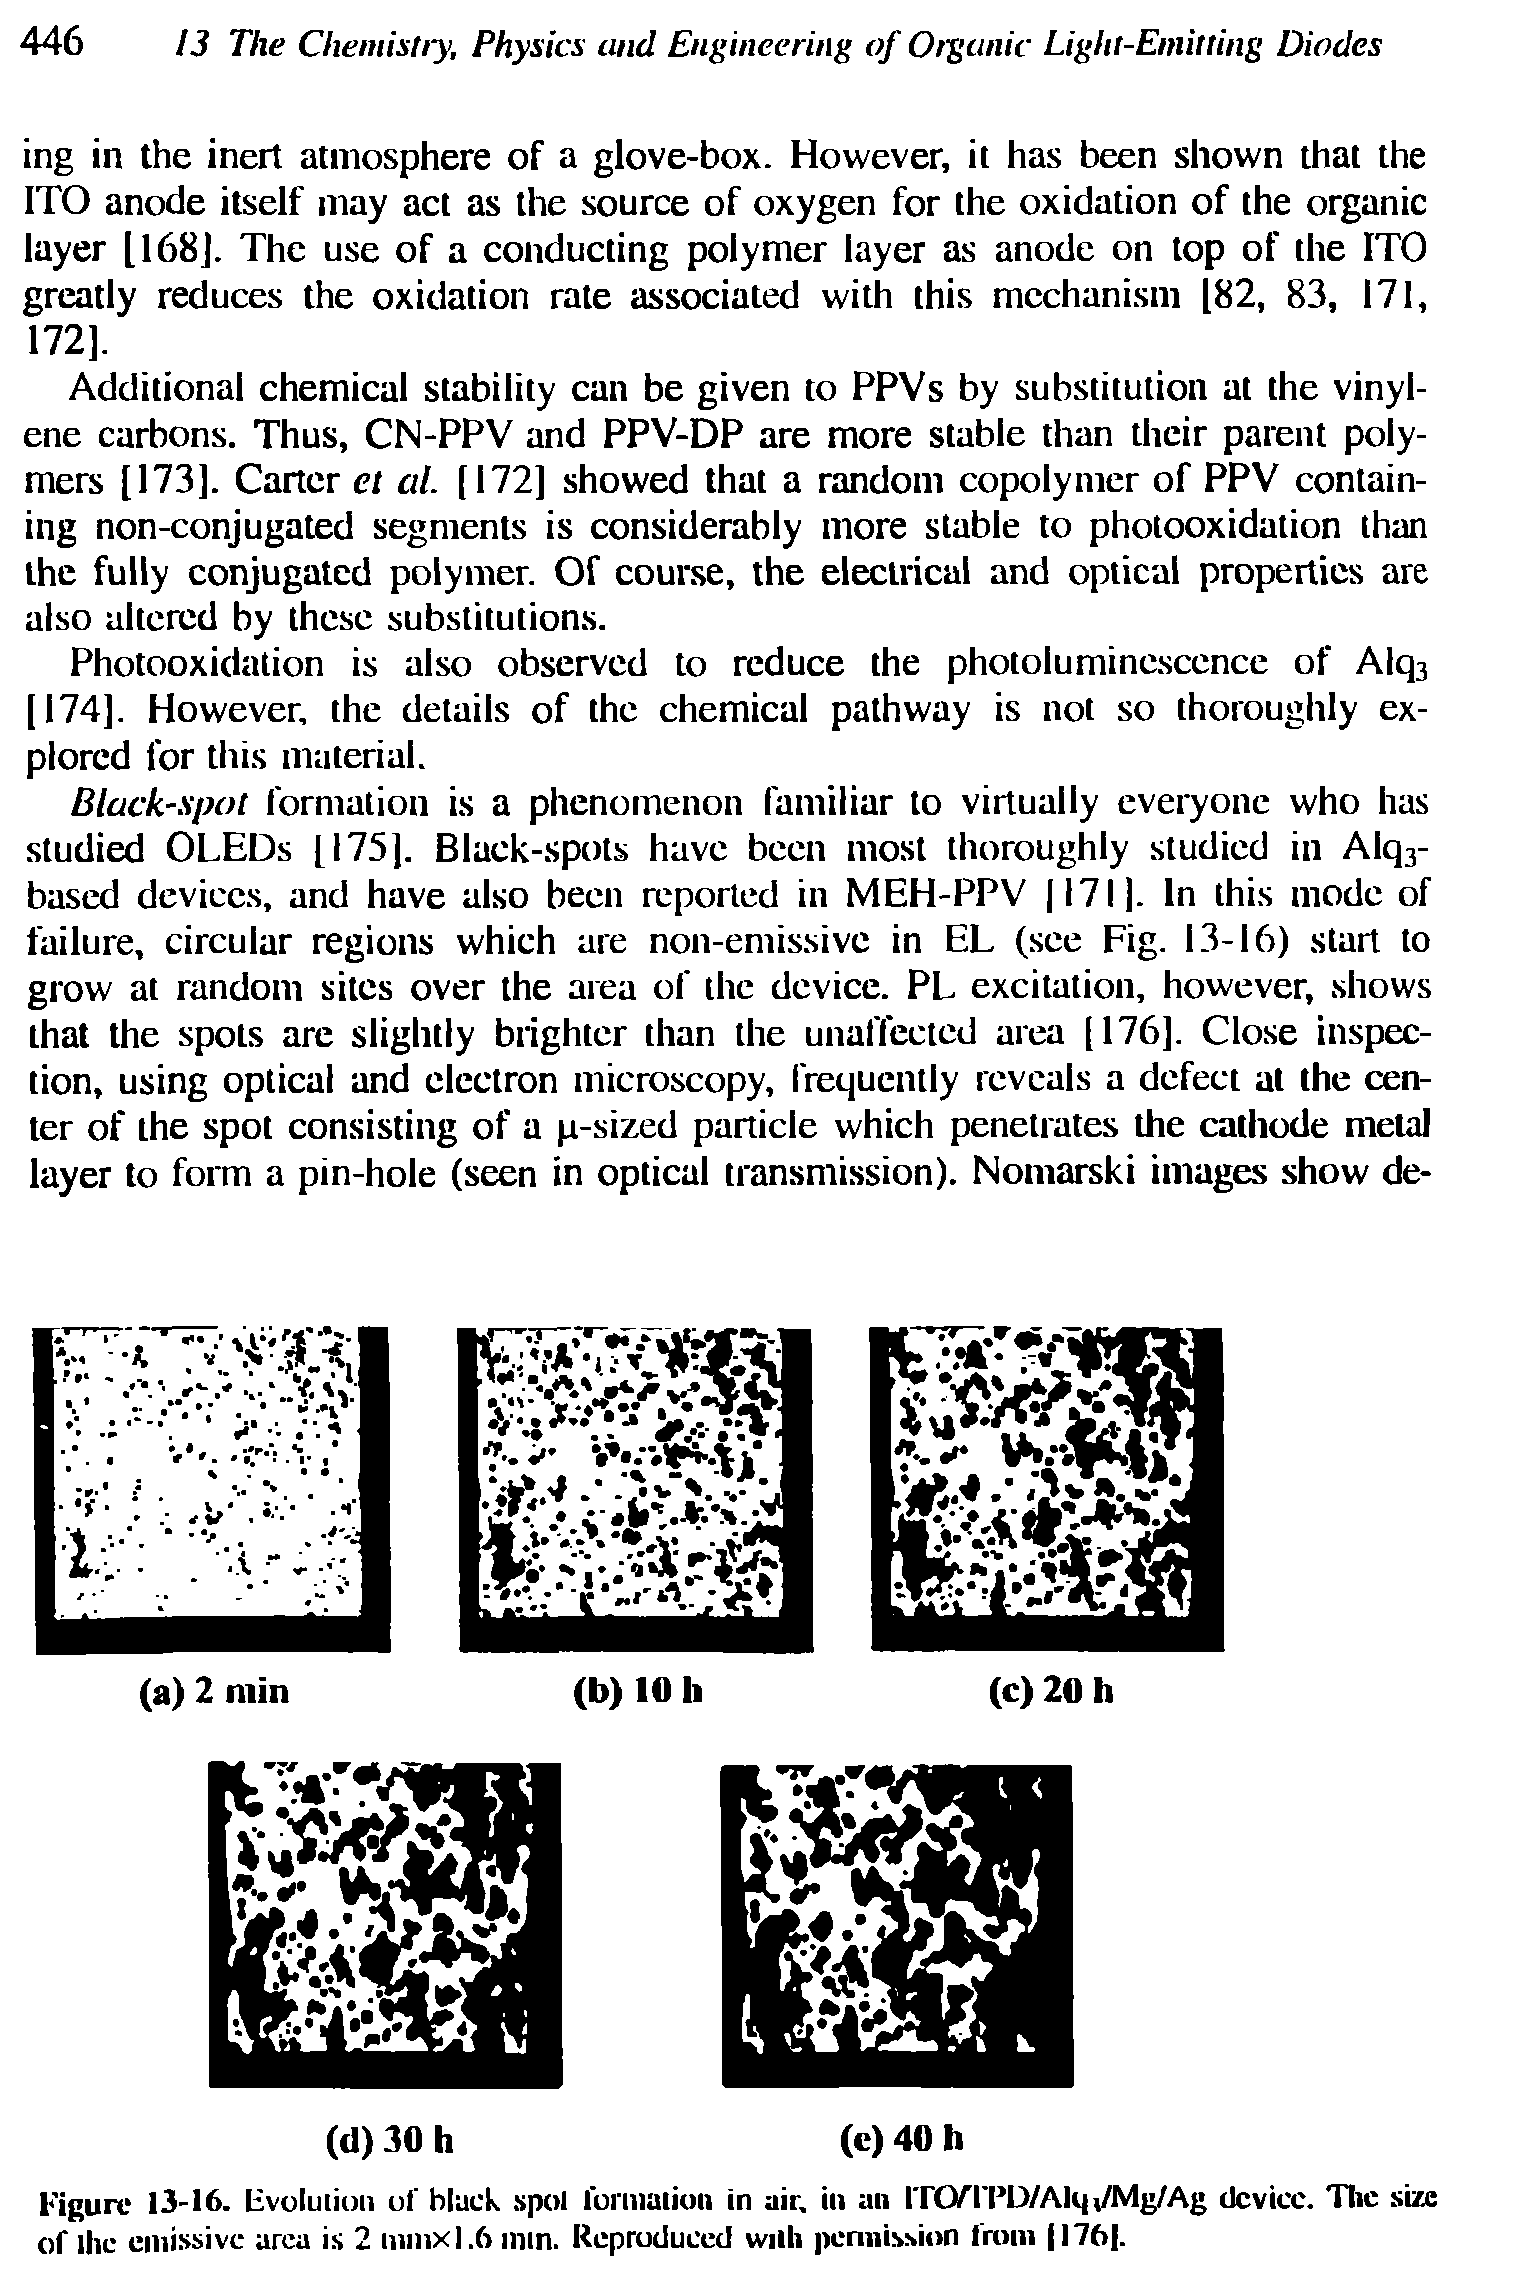 Figure 13-16. Fvoluiion of black spot formation in air. ill an ITO/TI D/Ak i/Mg/Ag device. The size of the emissive area is 2 minx 1.6 nun. Reproduced with permission Irom I76. ...